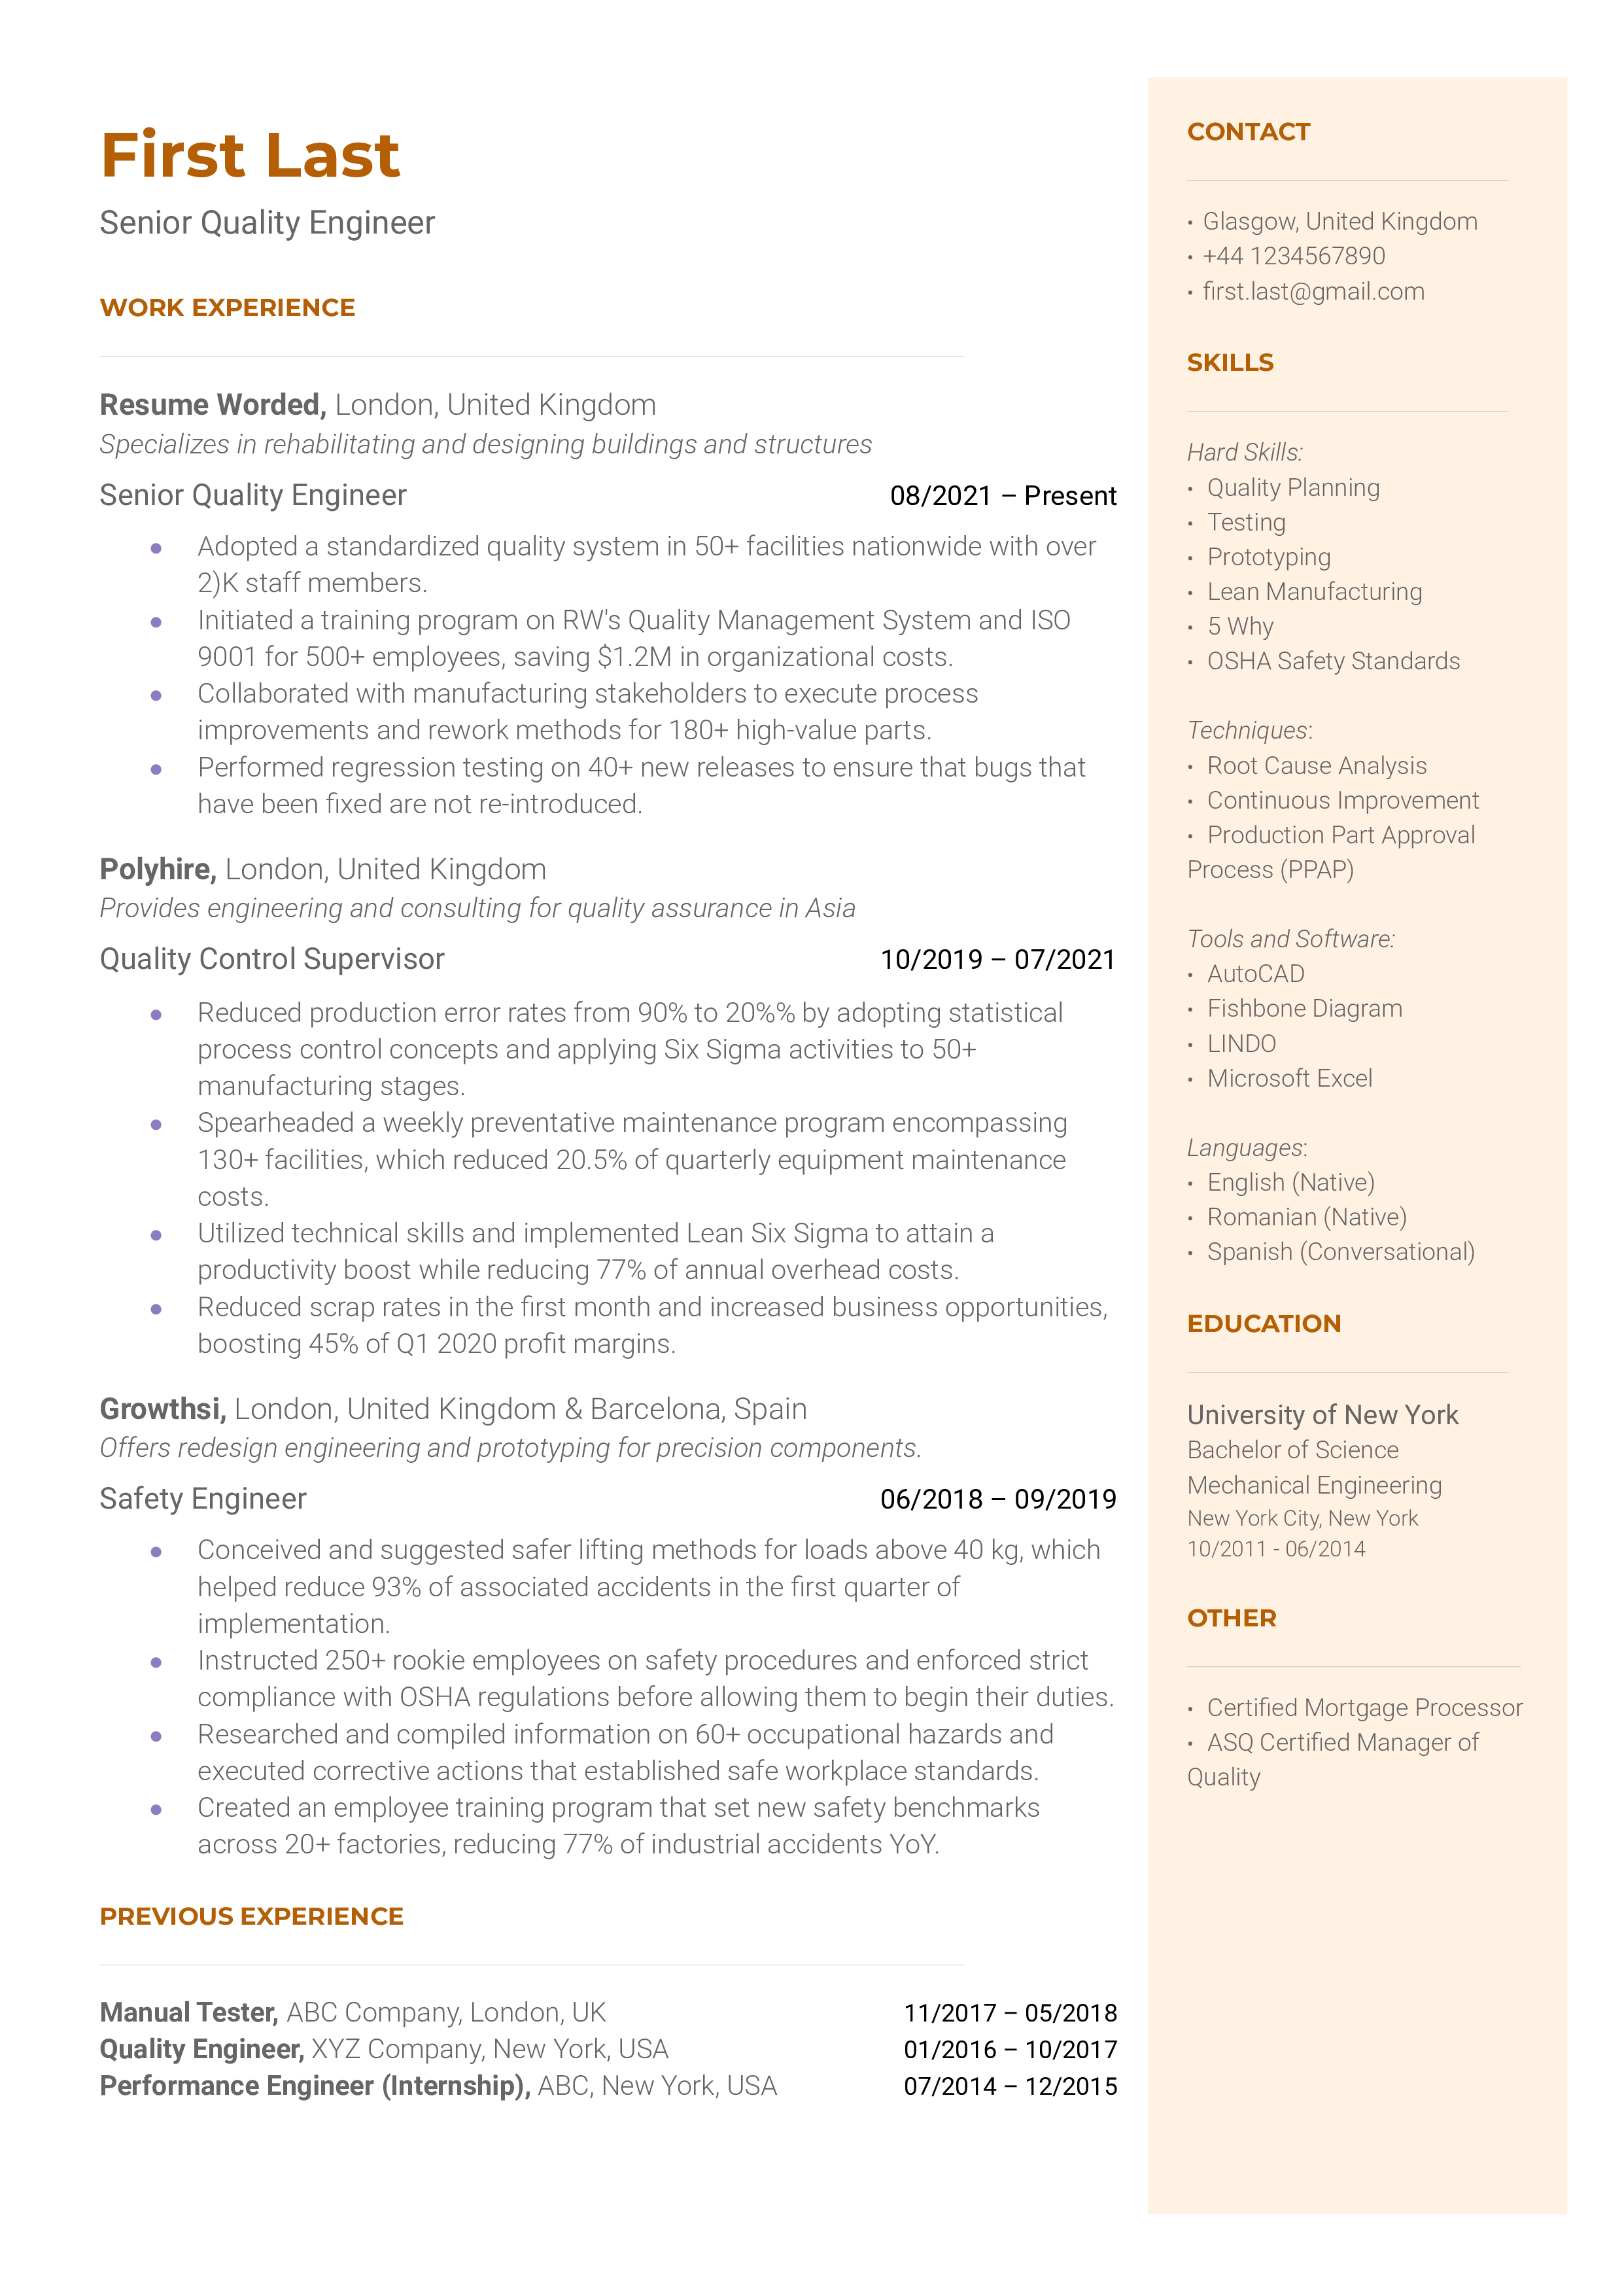 A well-structured CV for a Senior Quality Engineer role.